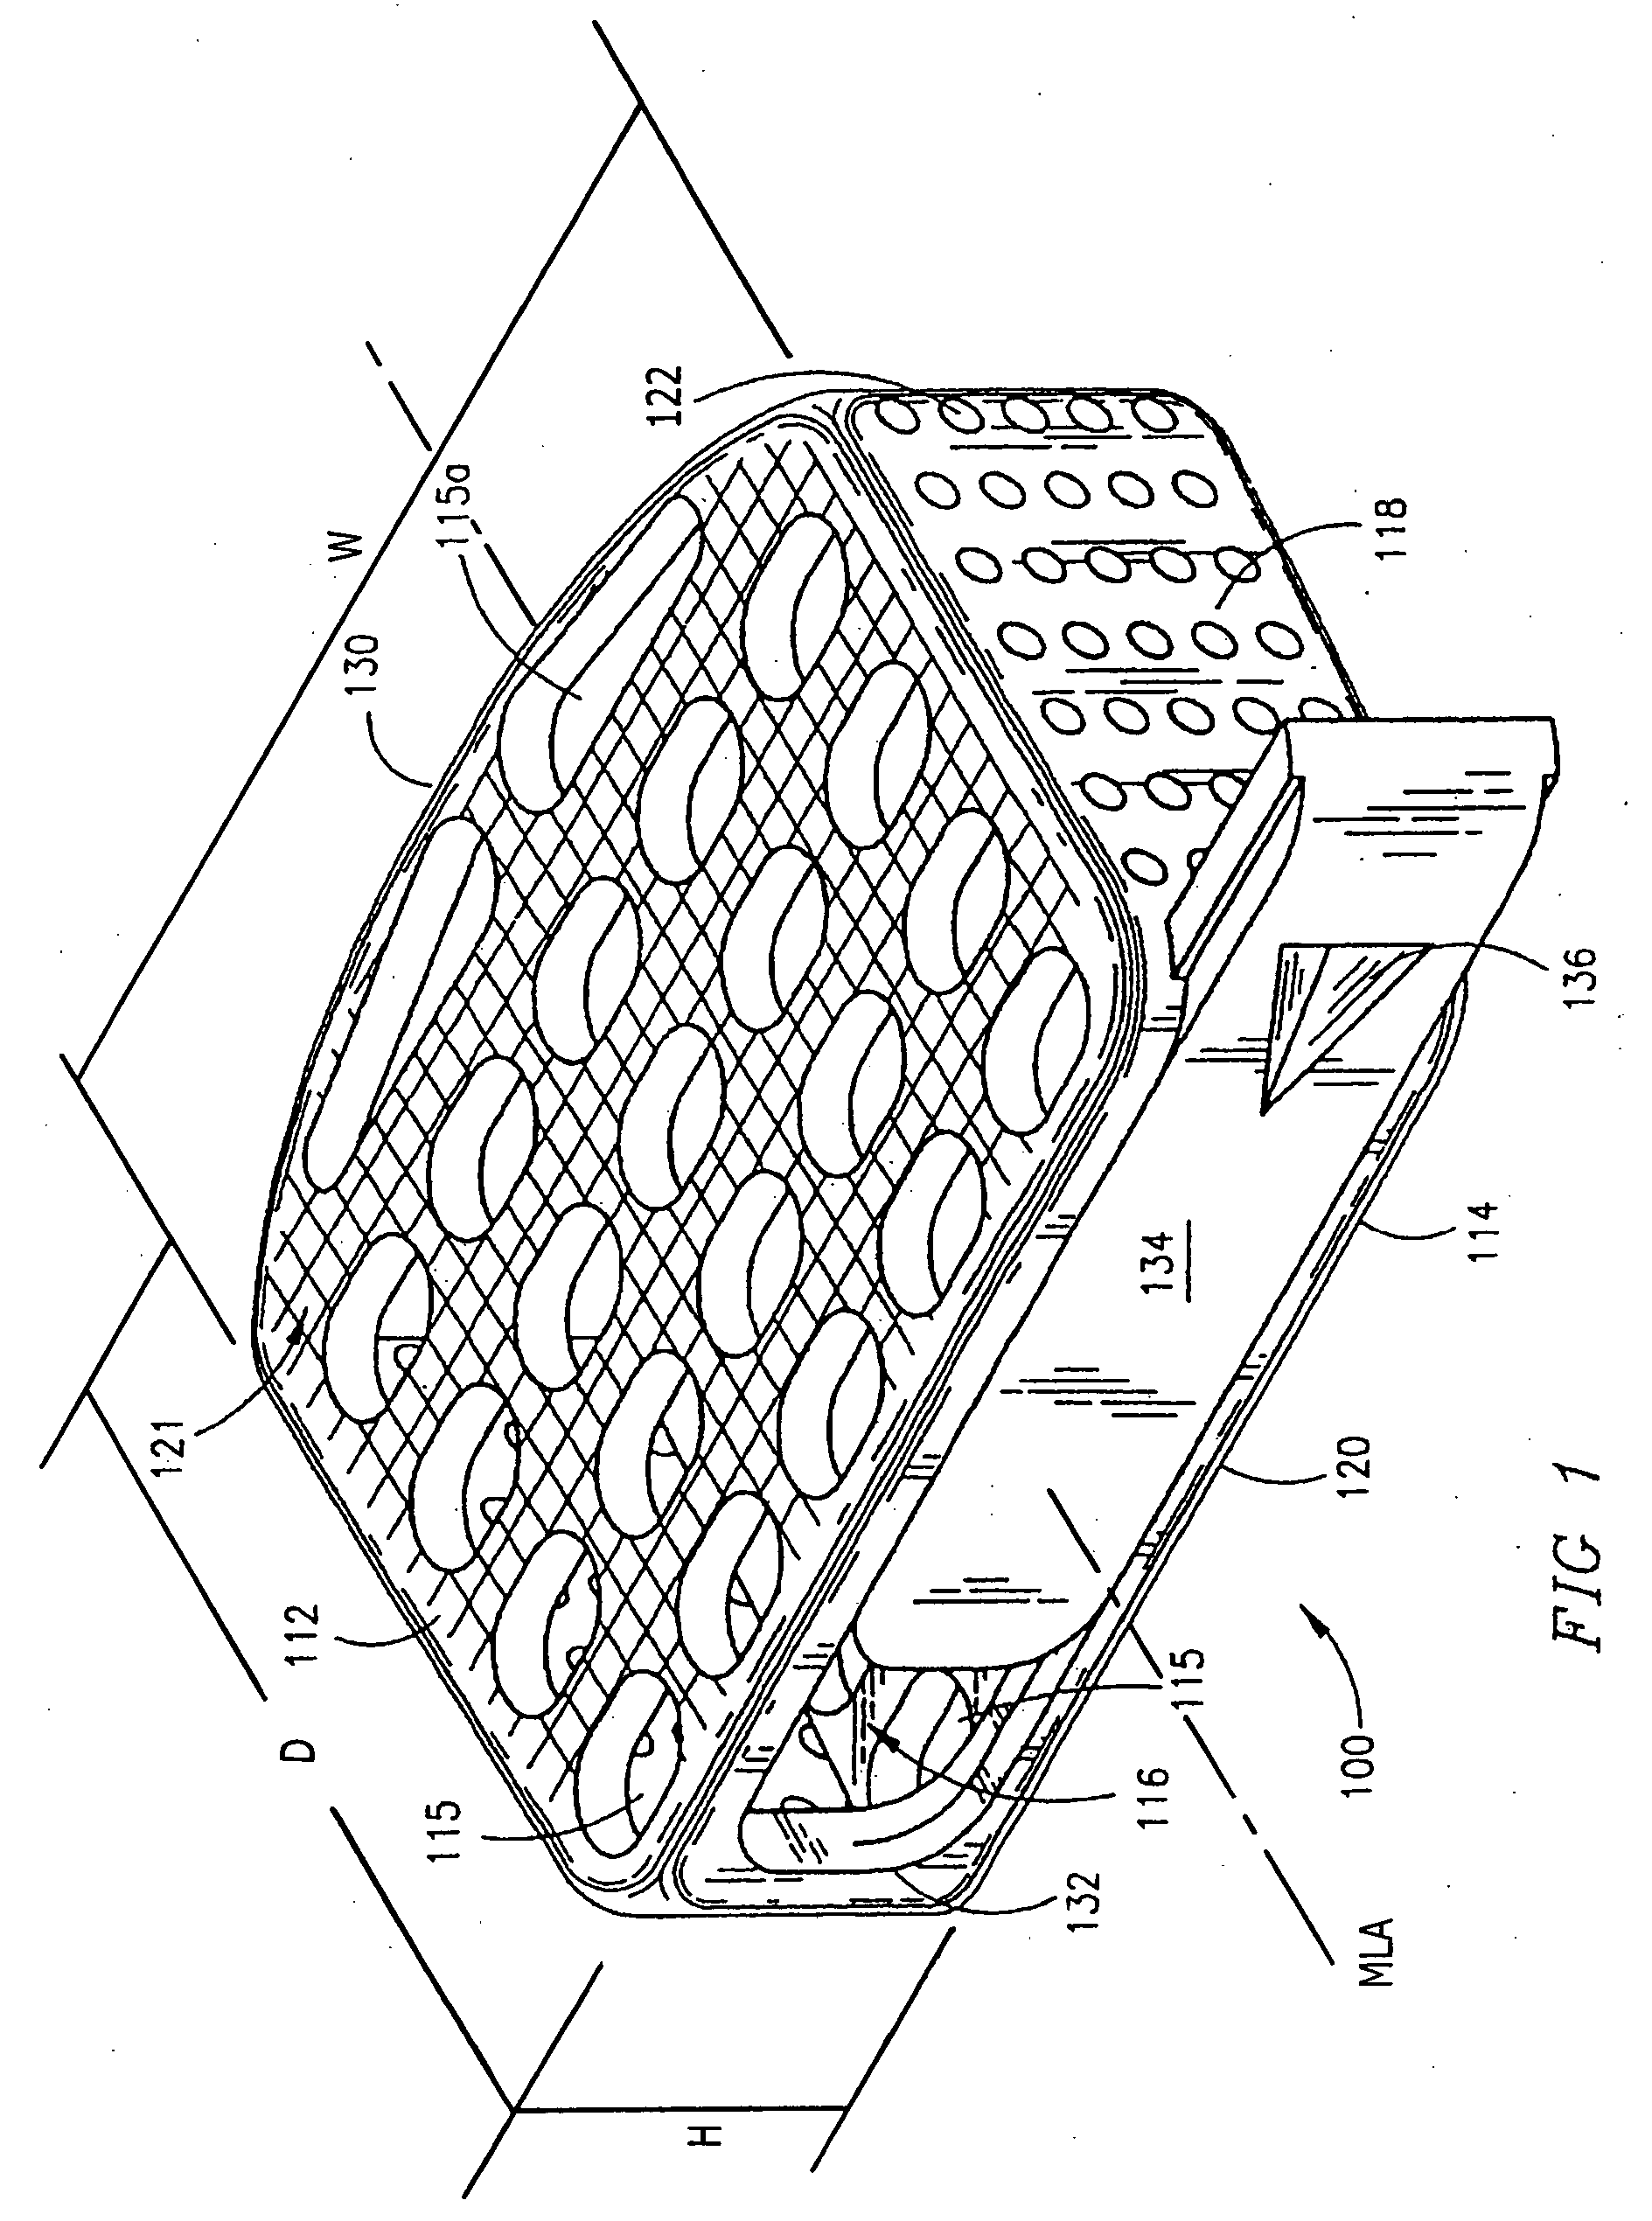 Implant having arcuate upper and lower bearing surfaces along a longitudinal axis